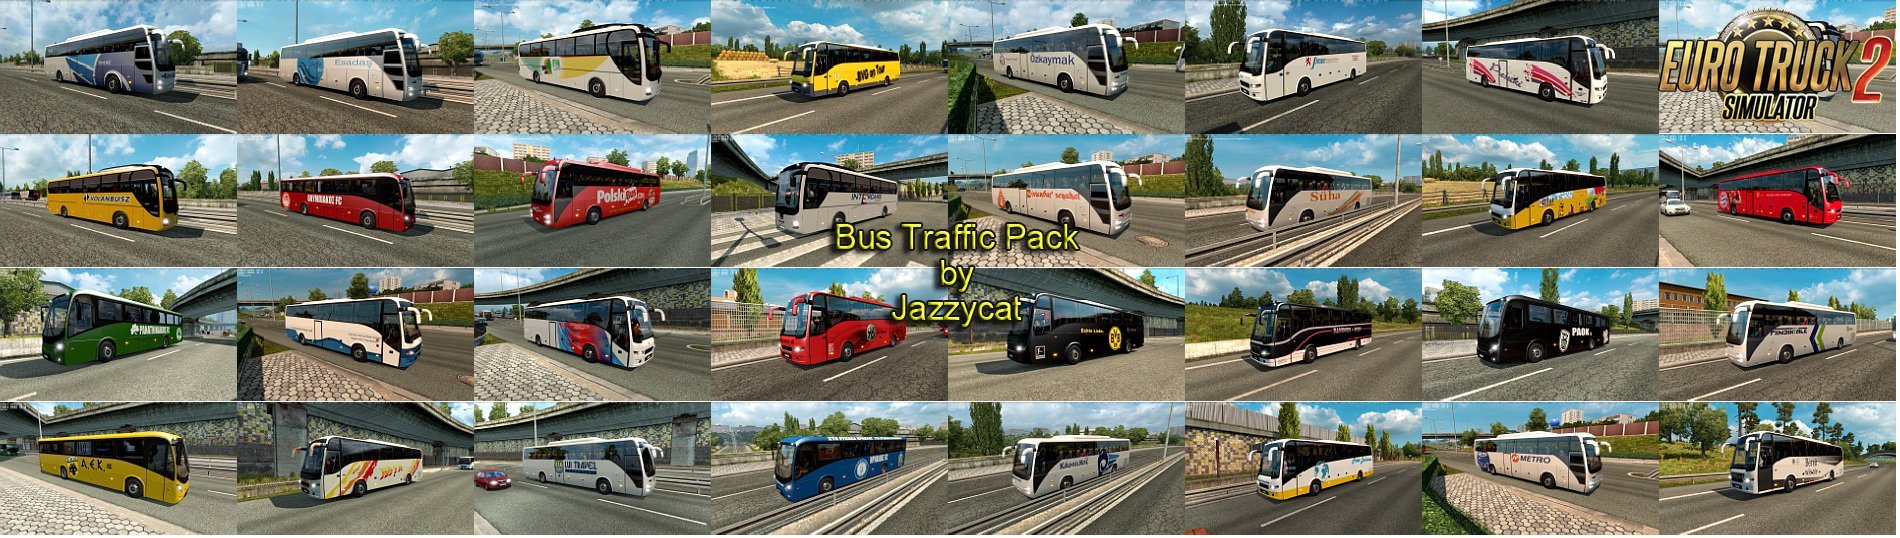 Bus Traffic Pack v1.5 by Jazzycat [1.26.x]